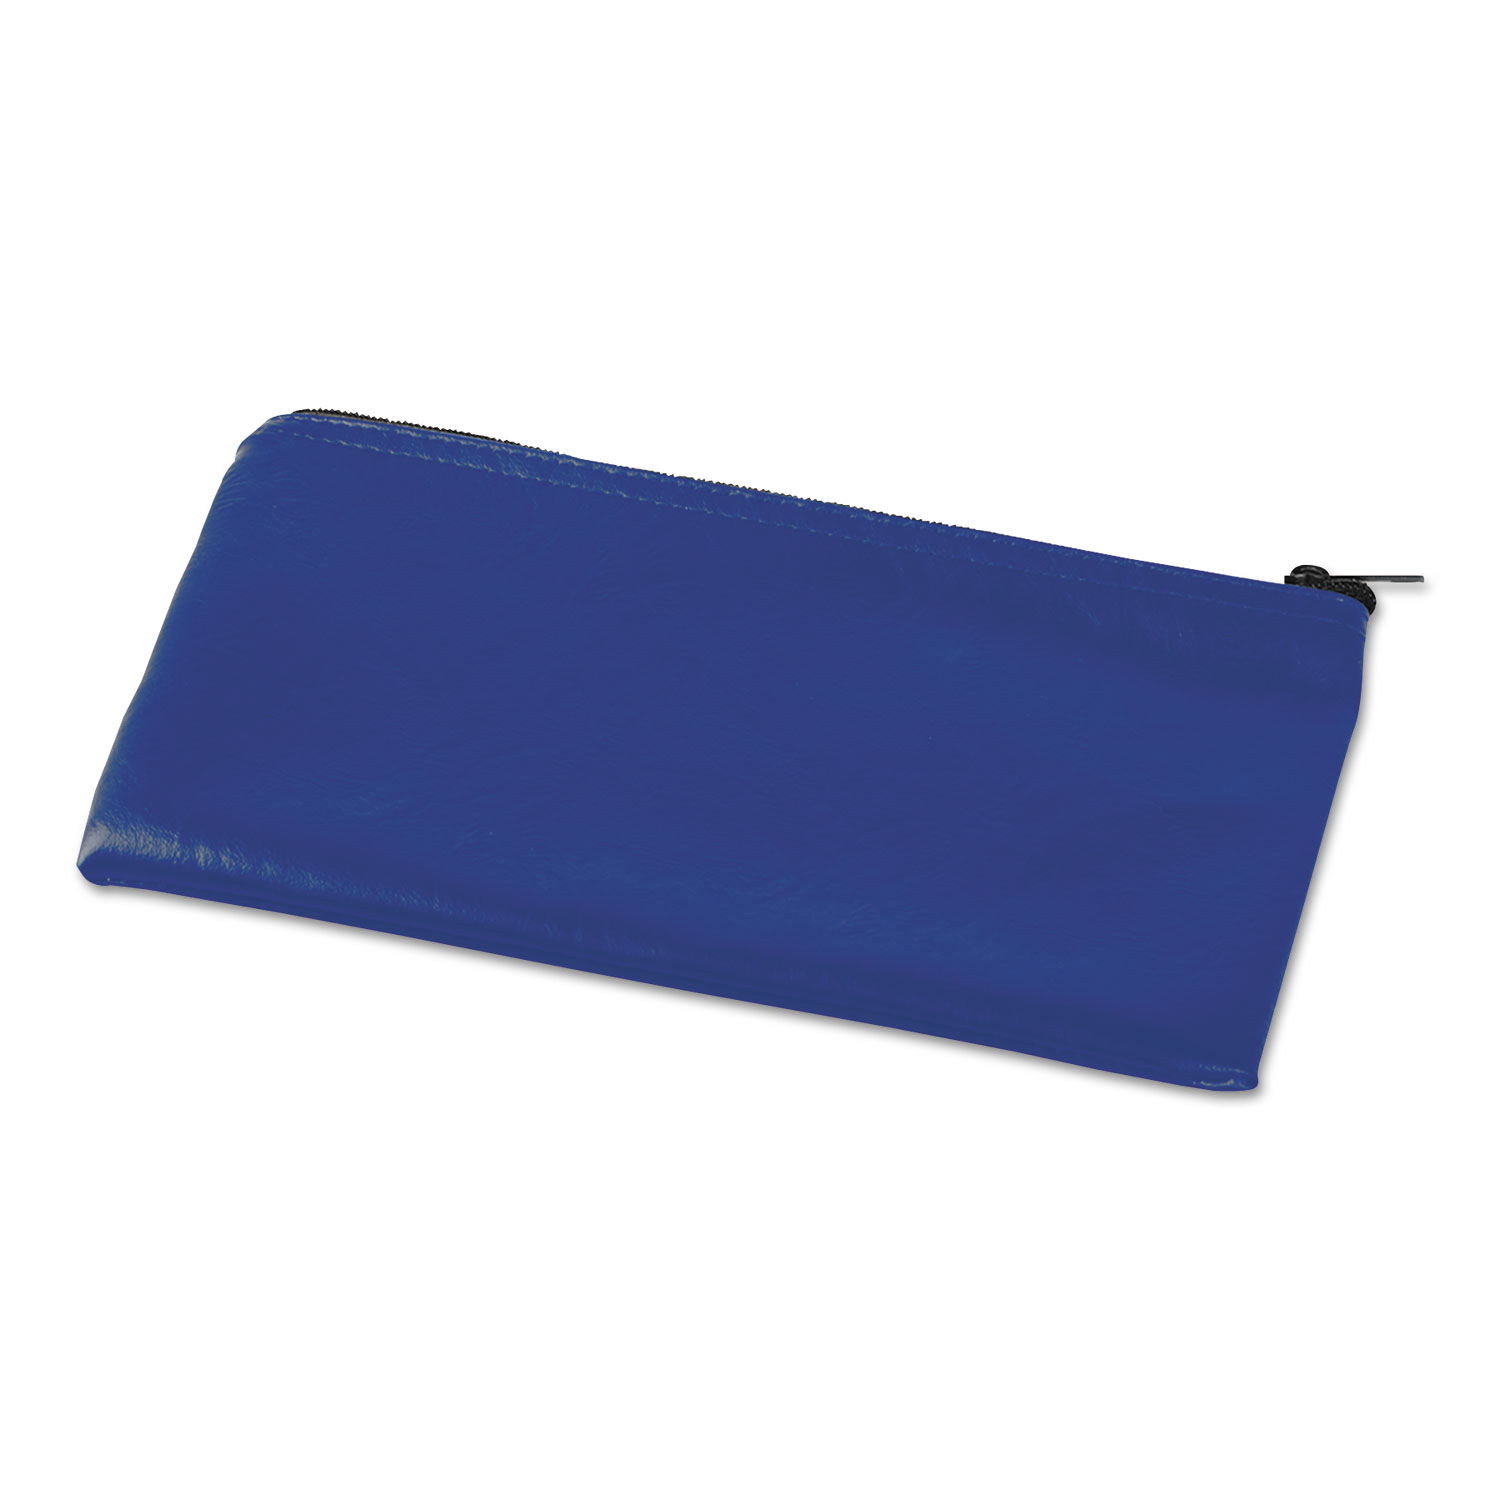 Zippered Wallets/Cases, 11 x 6, Blue, 2 per pack